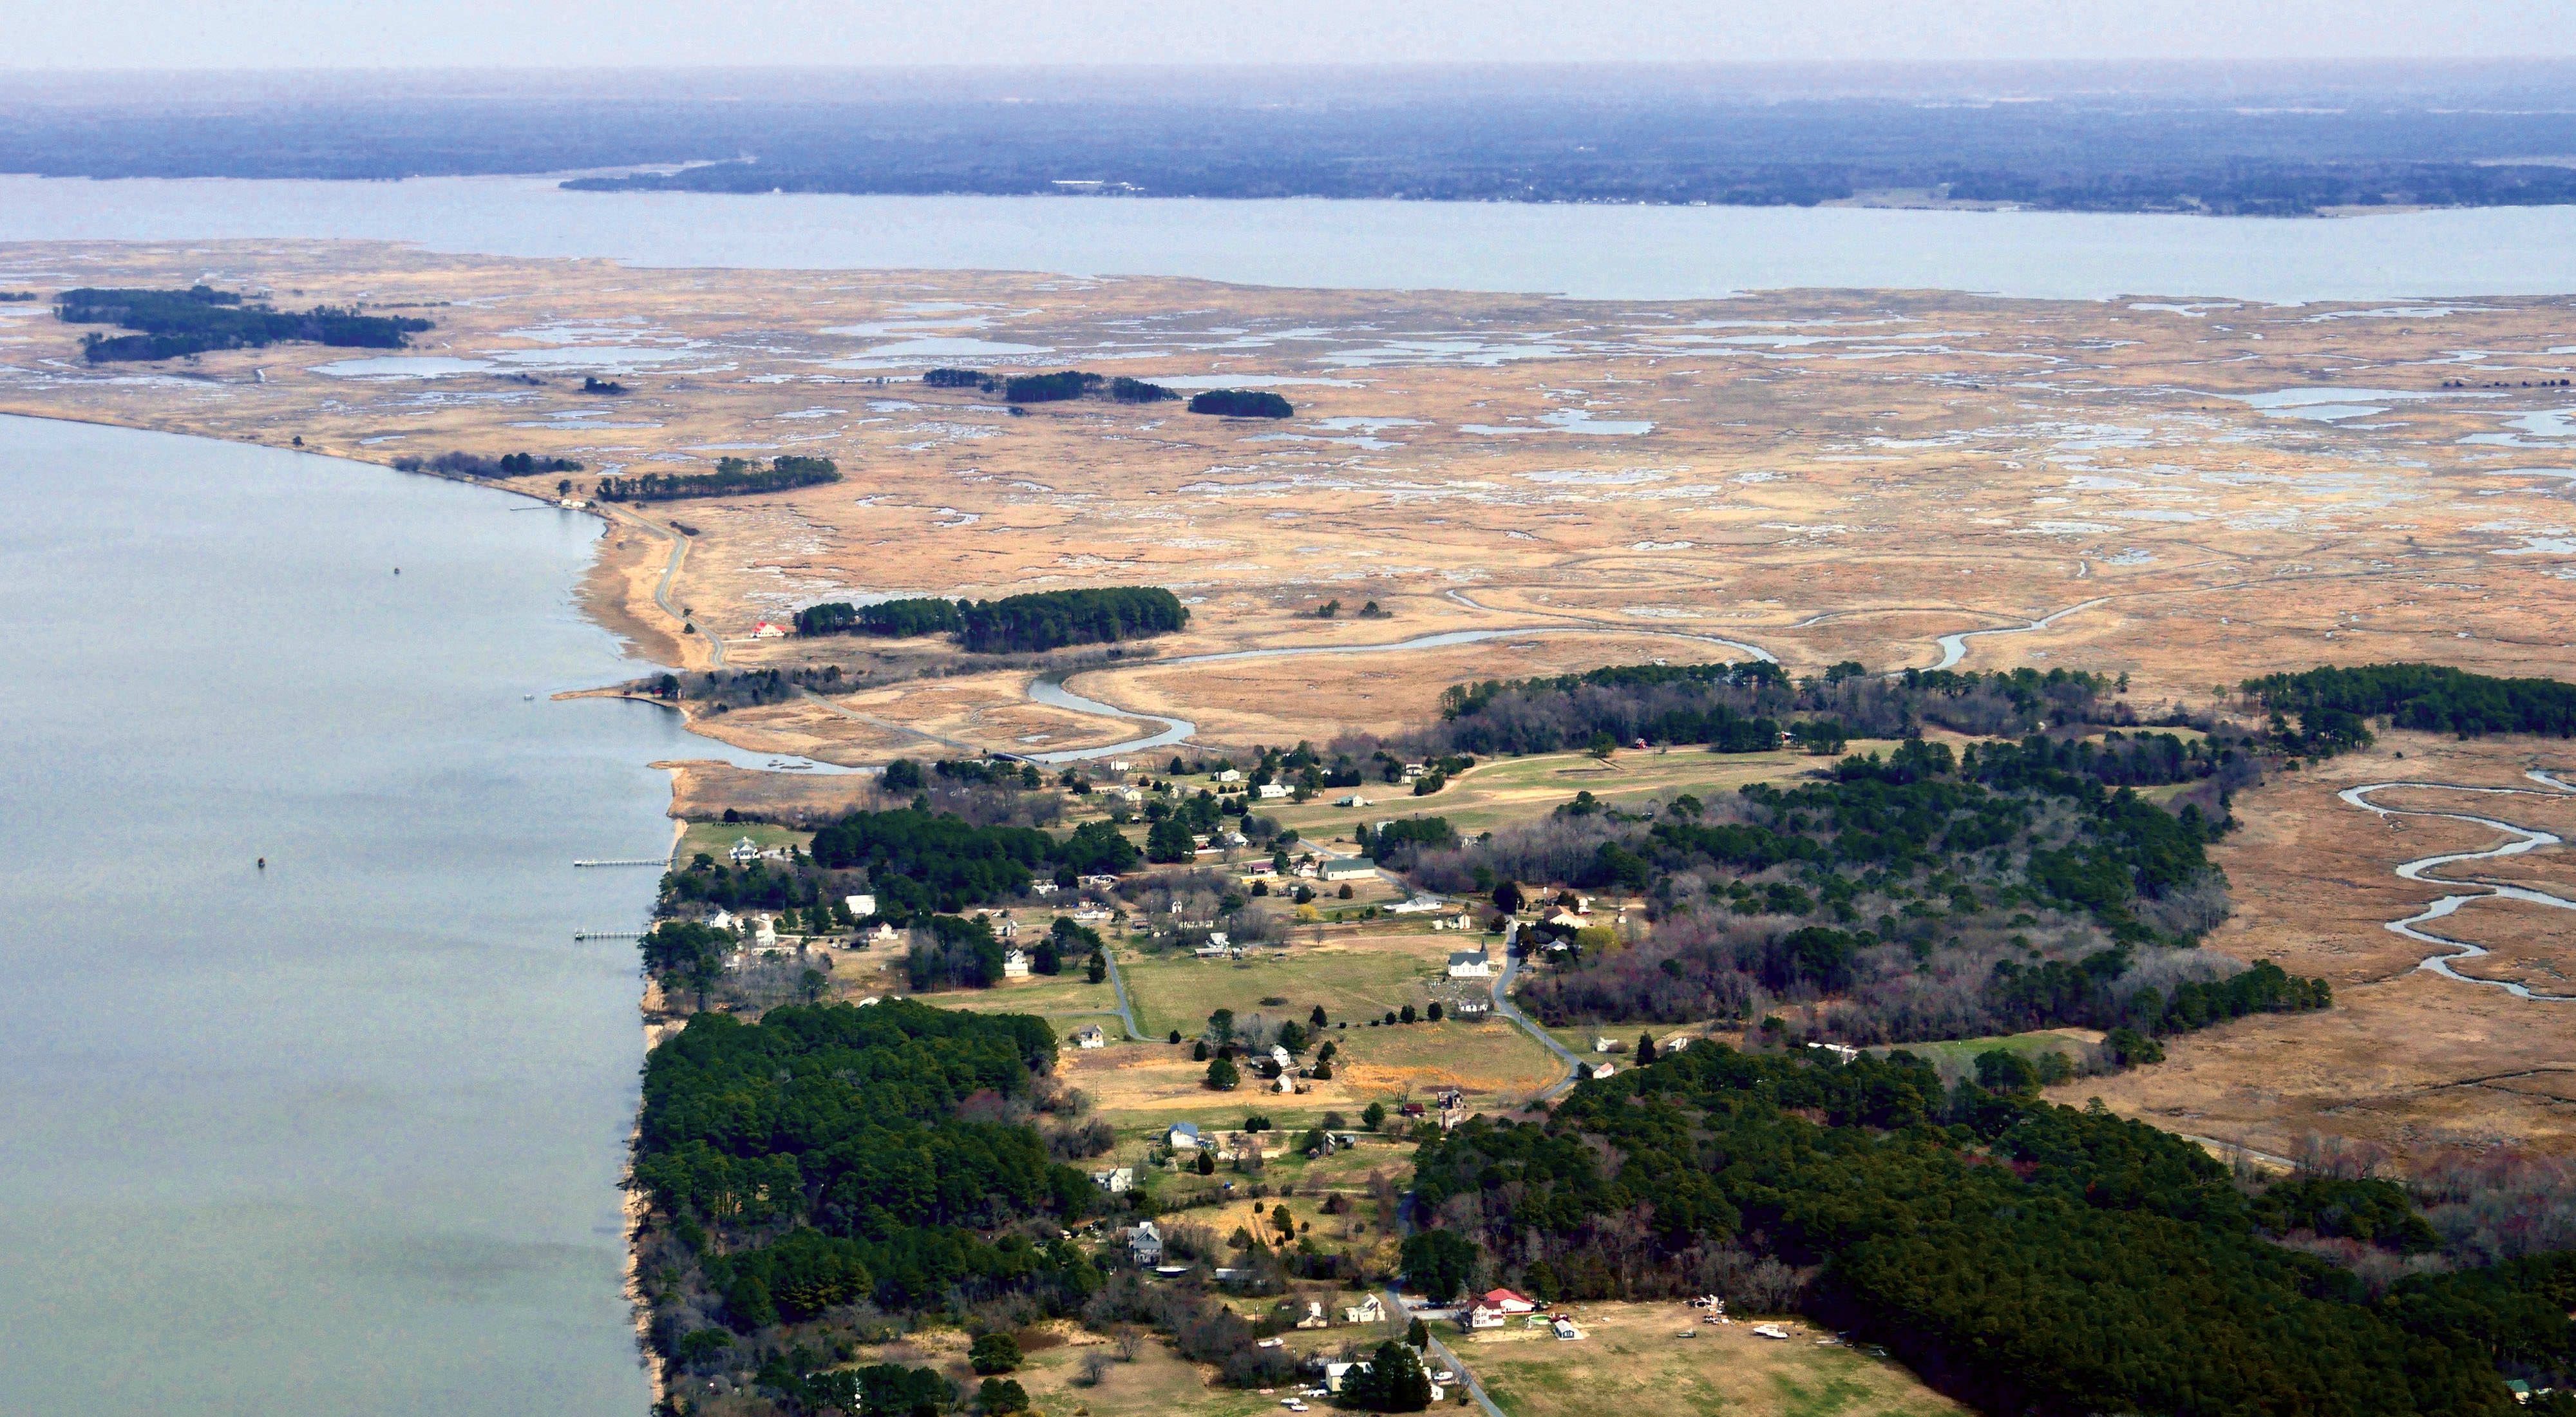 Aerial view looking down on a coastal Eastern Shore community. Houses are clustered around open fields and surrounded by stands of trees. Open marsh extends behind the community ending at the water.